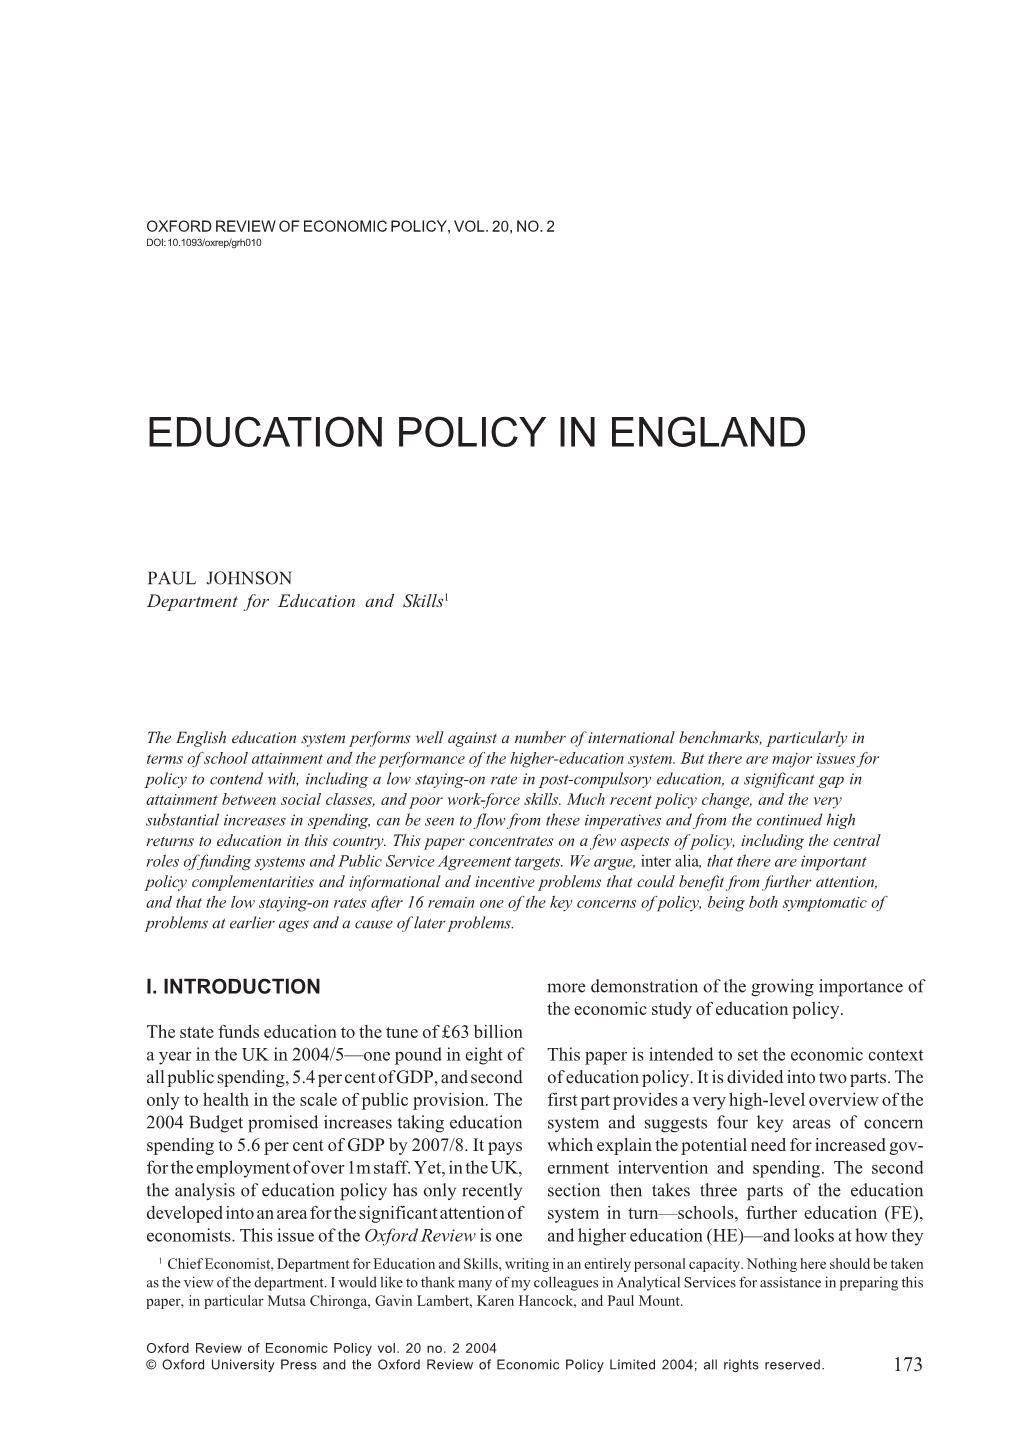 Education Policy in England